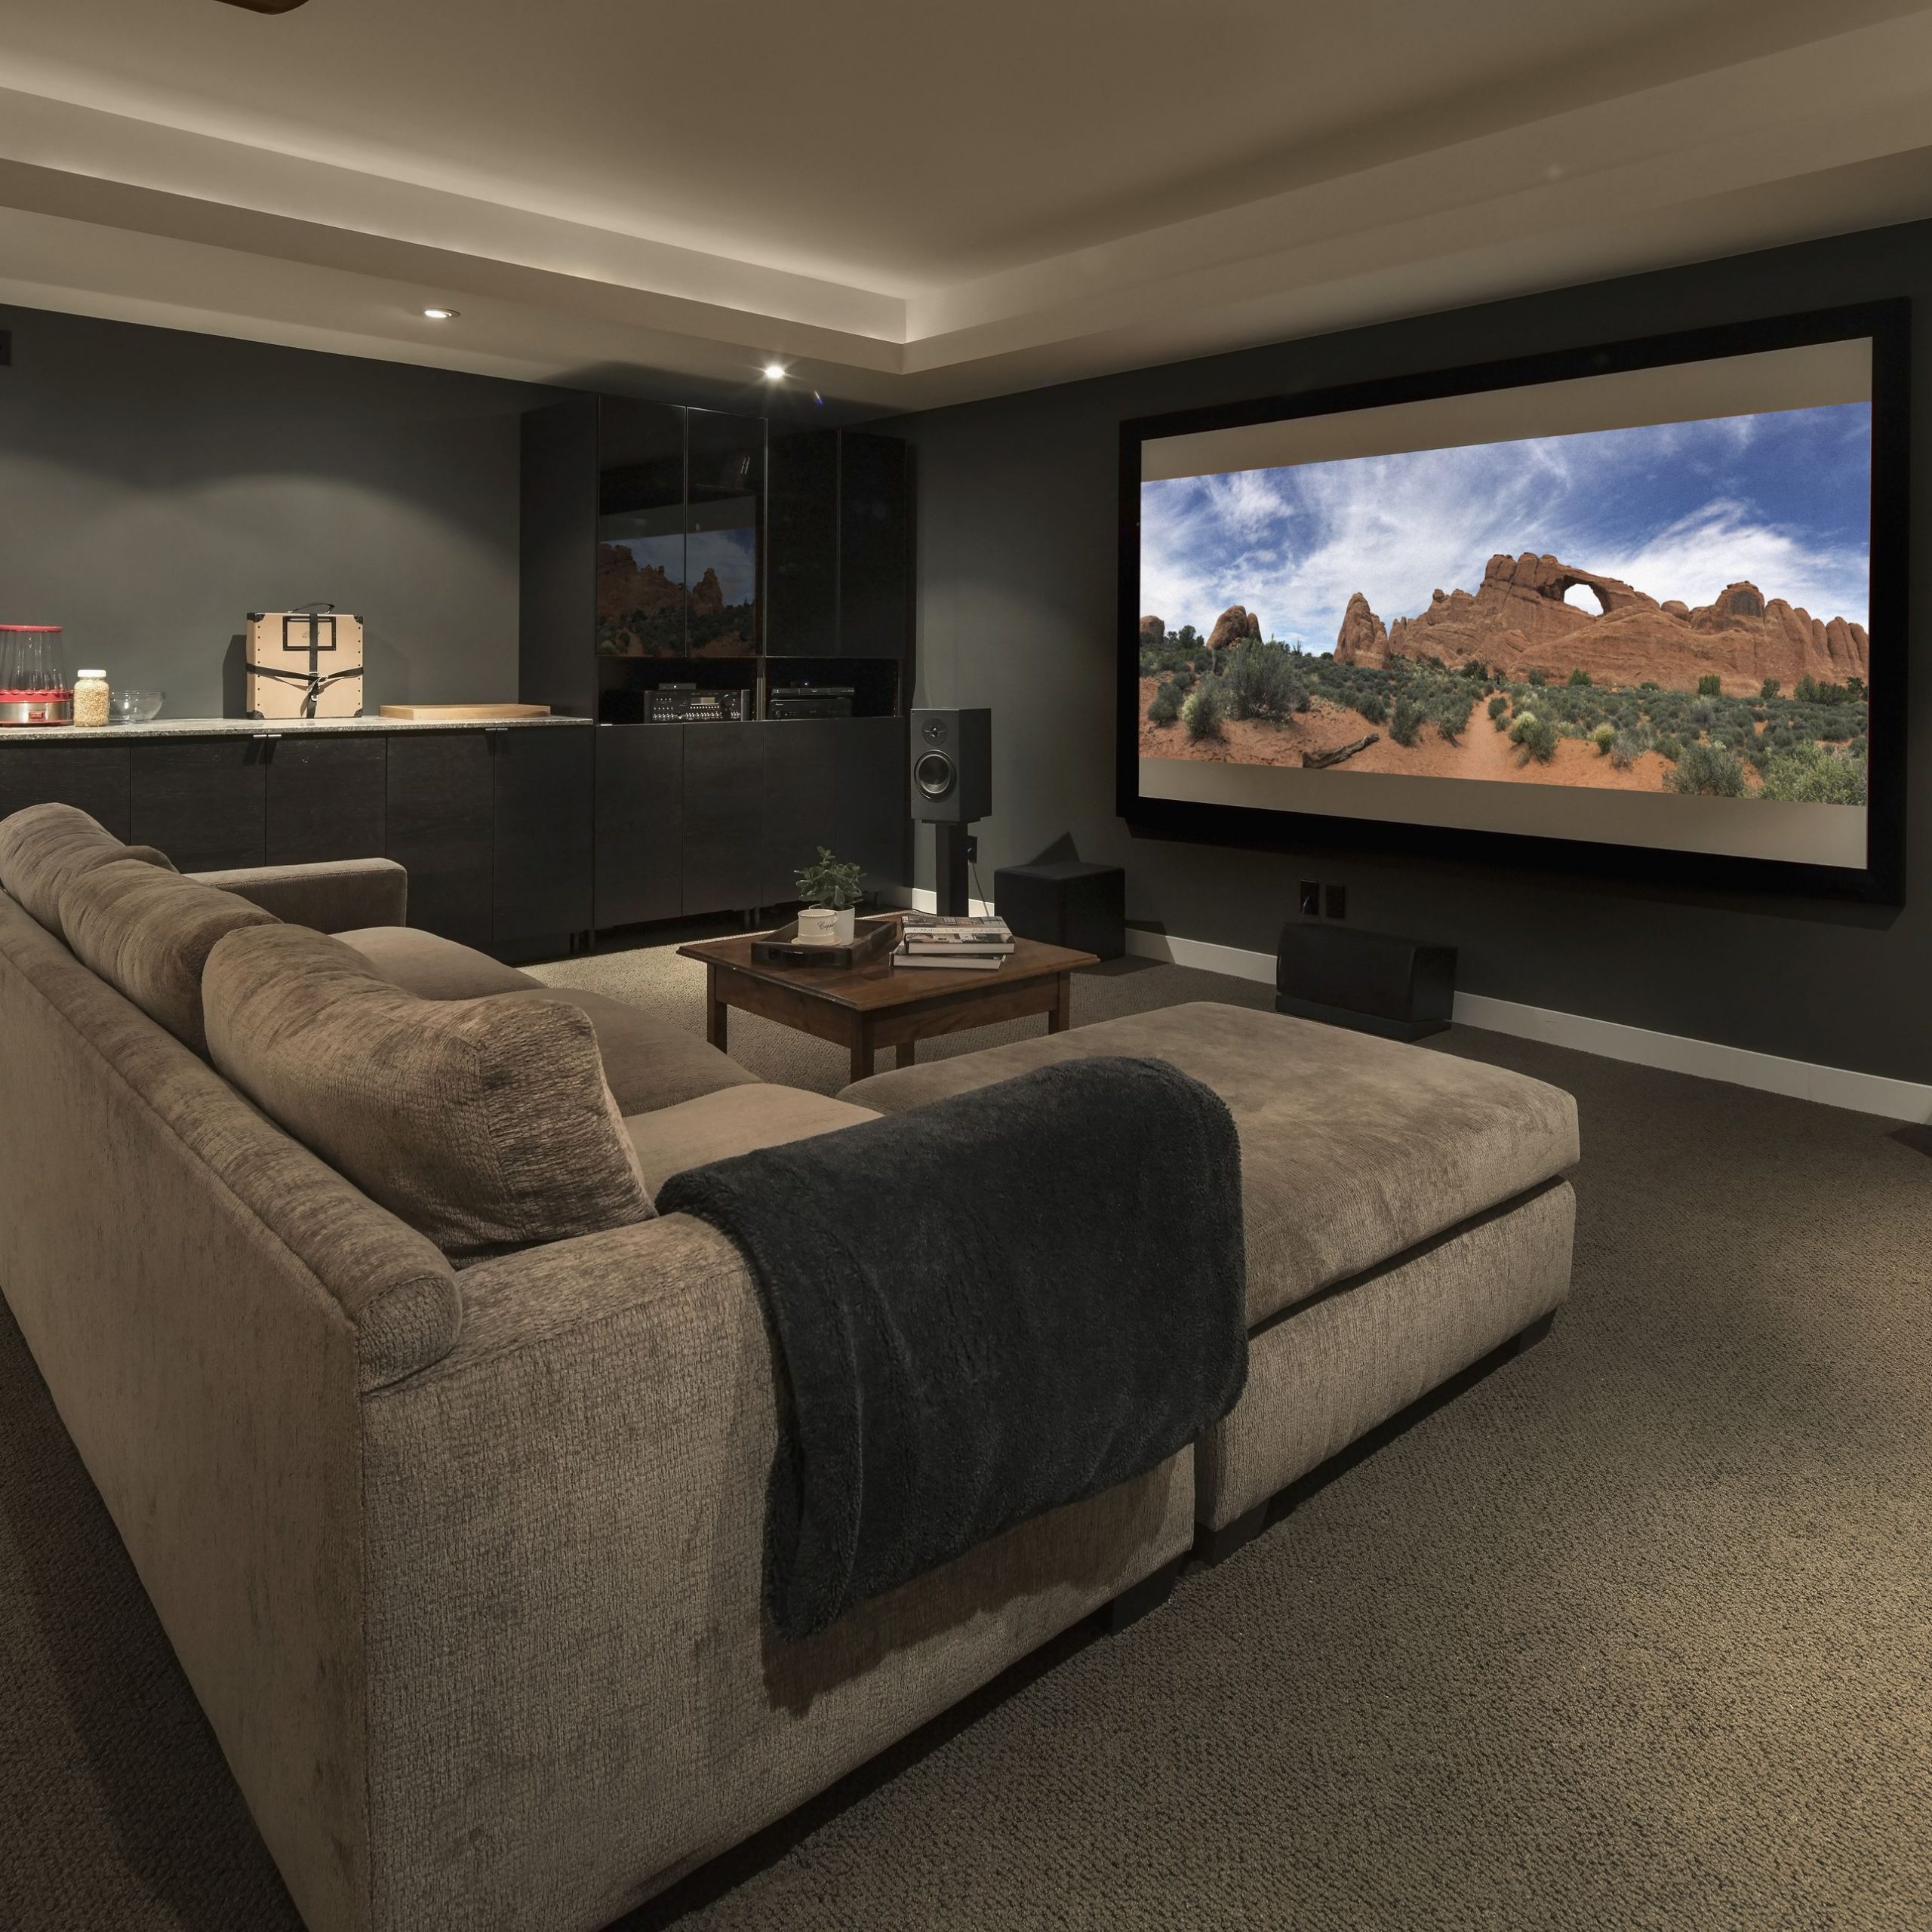 Wiring A Home Theater Room - A3 Wiring Diagr